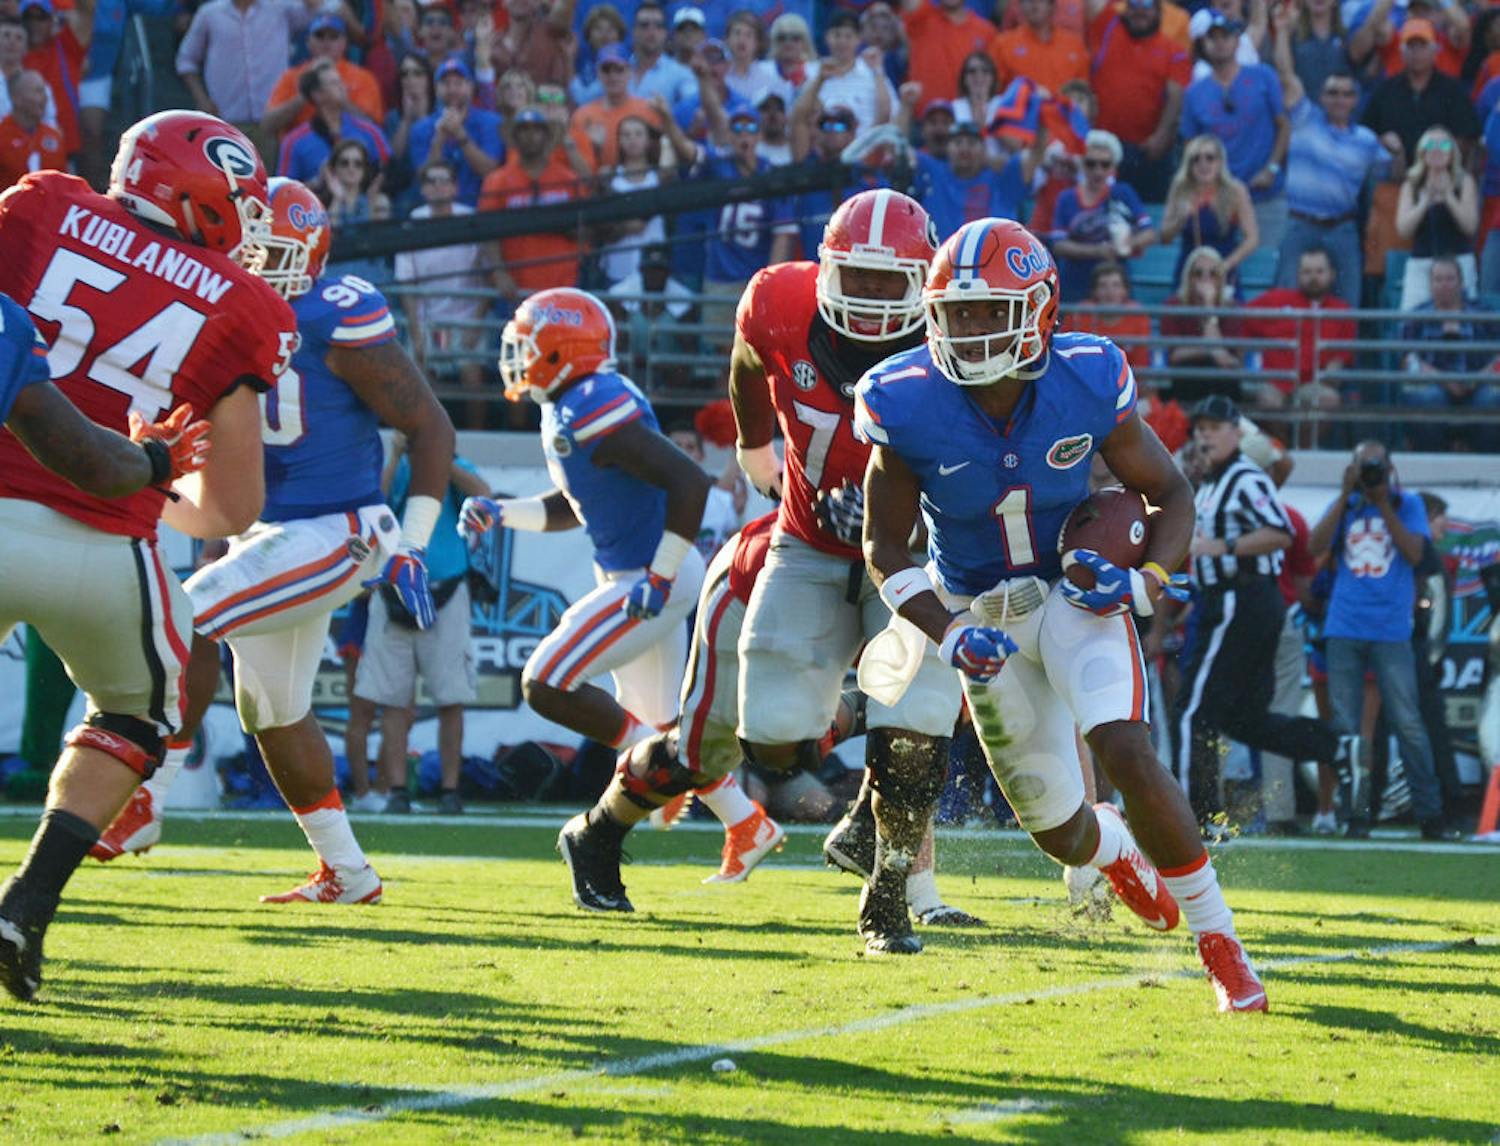 UF defensive back Vernon Hargreaves III returns an intercepted pass during the first half of Florida's 27-3 win against Georgia on Oct. 31, 2015, at EverBank Field in Jacksonville.